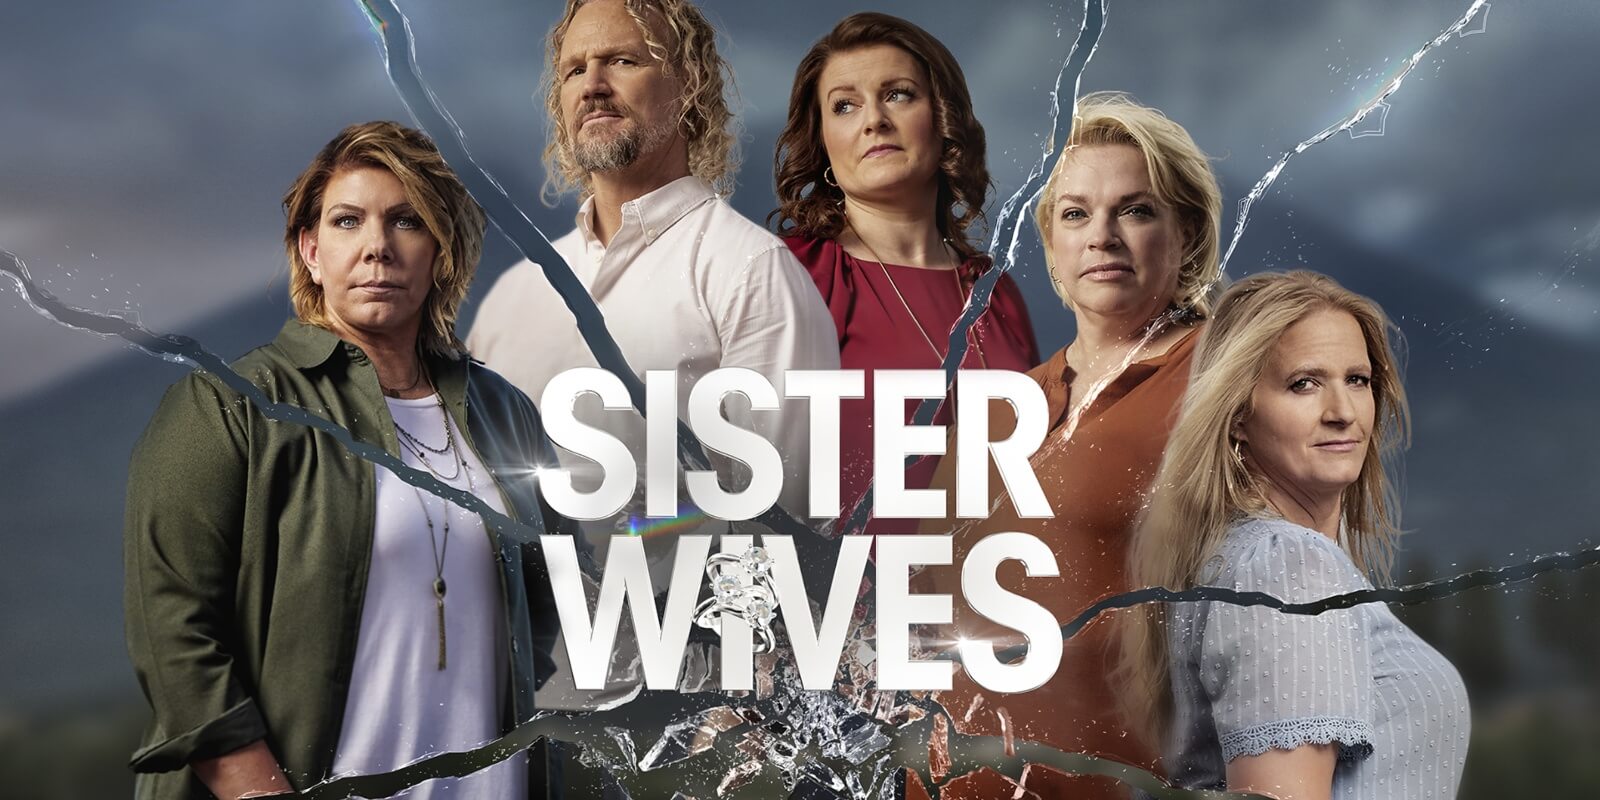 The cast of TLC's 'Sister Wives' in a photo depicting the events of season 18.